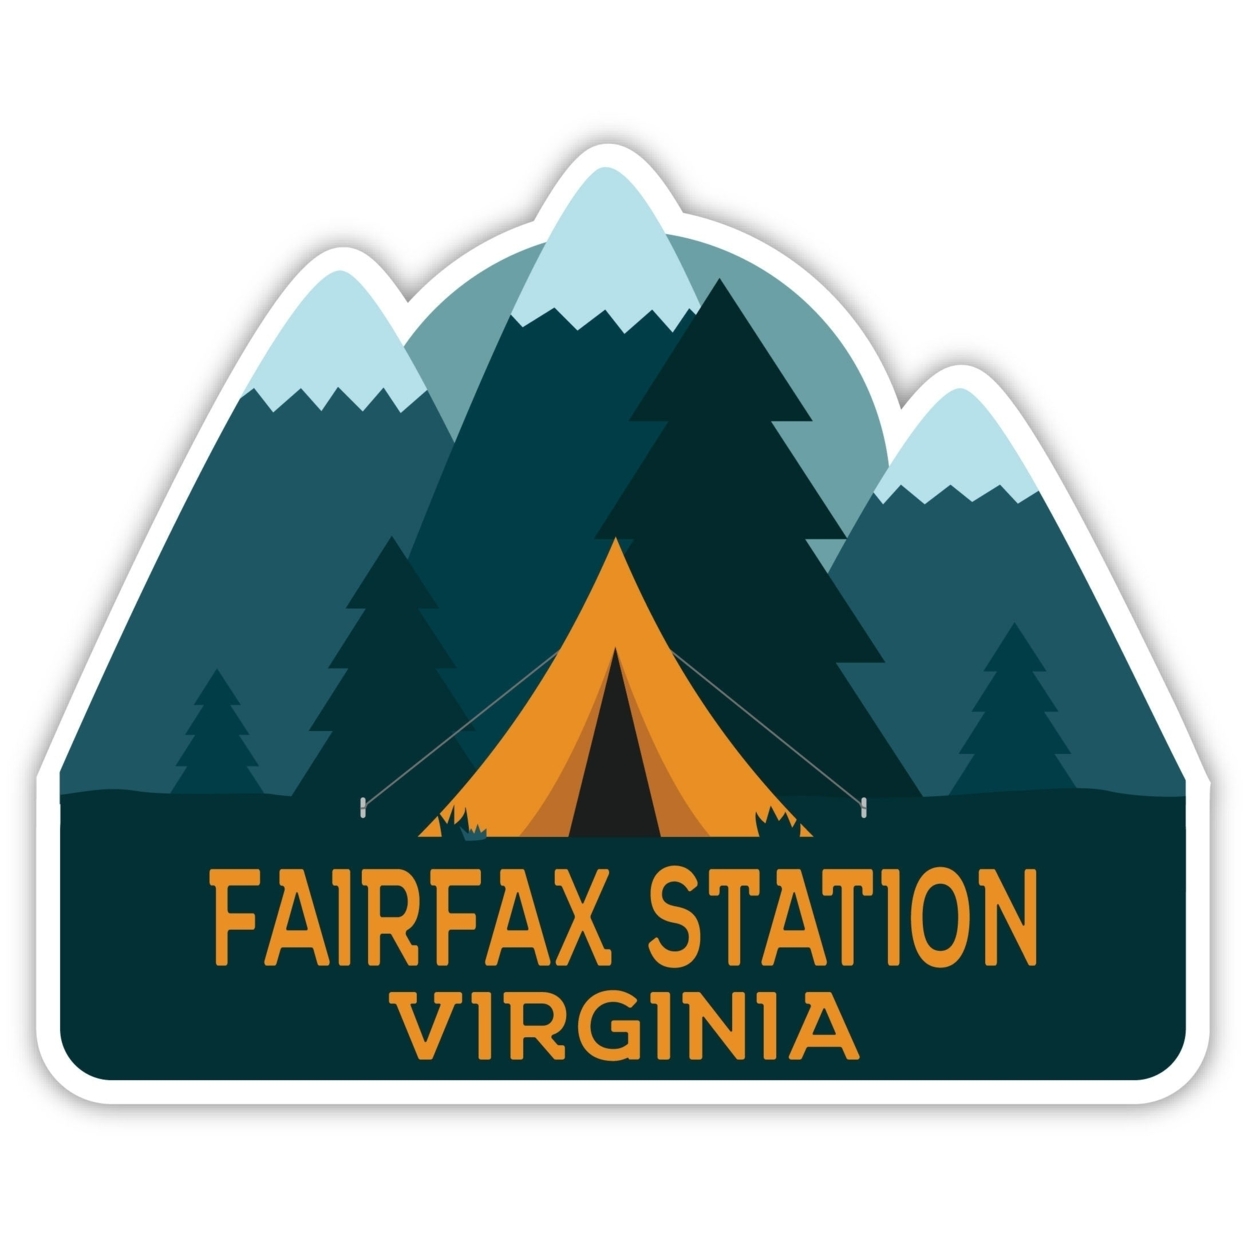 Fairfax Station Virginia Souvenir Decorative Stickers (Choose Theme And Size) - 4-Pack, 6-Inch, Tent